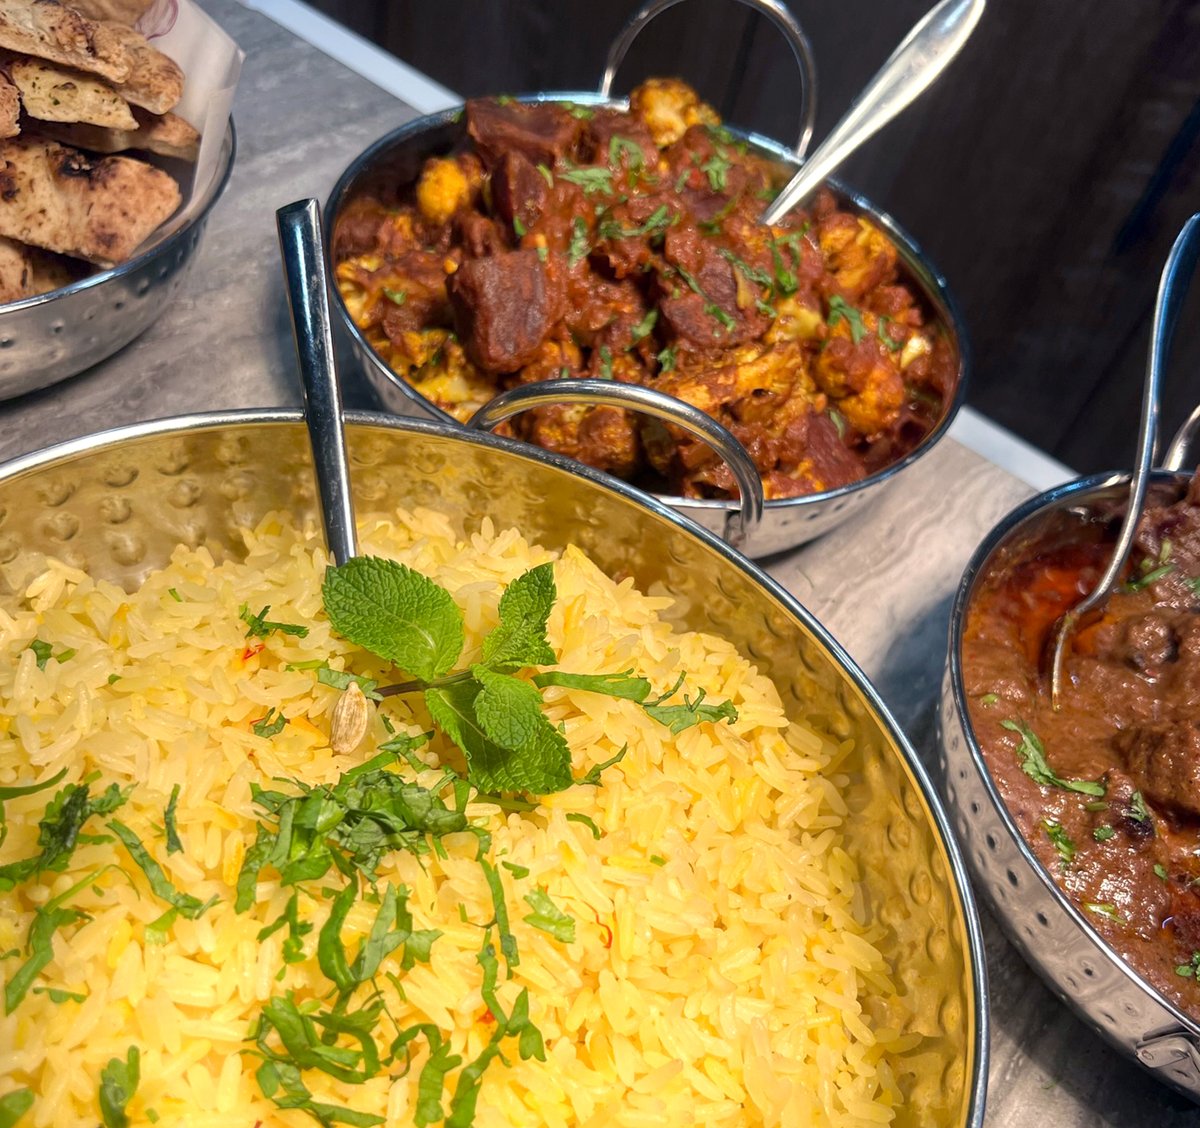 Attending this year's #IAPSConf23? 

We're at stand 66, currently serving a delicious Beef Rendang. Come along, everyone's welcome. We can't wait to catch up with all our clients and meet new ones as well.
 #feedingindependentminds @iapsuk